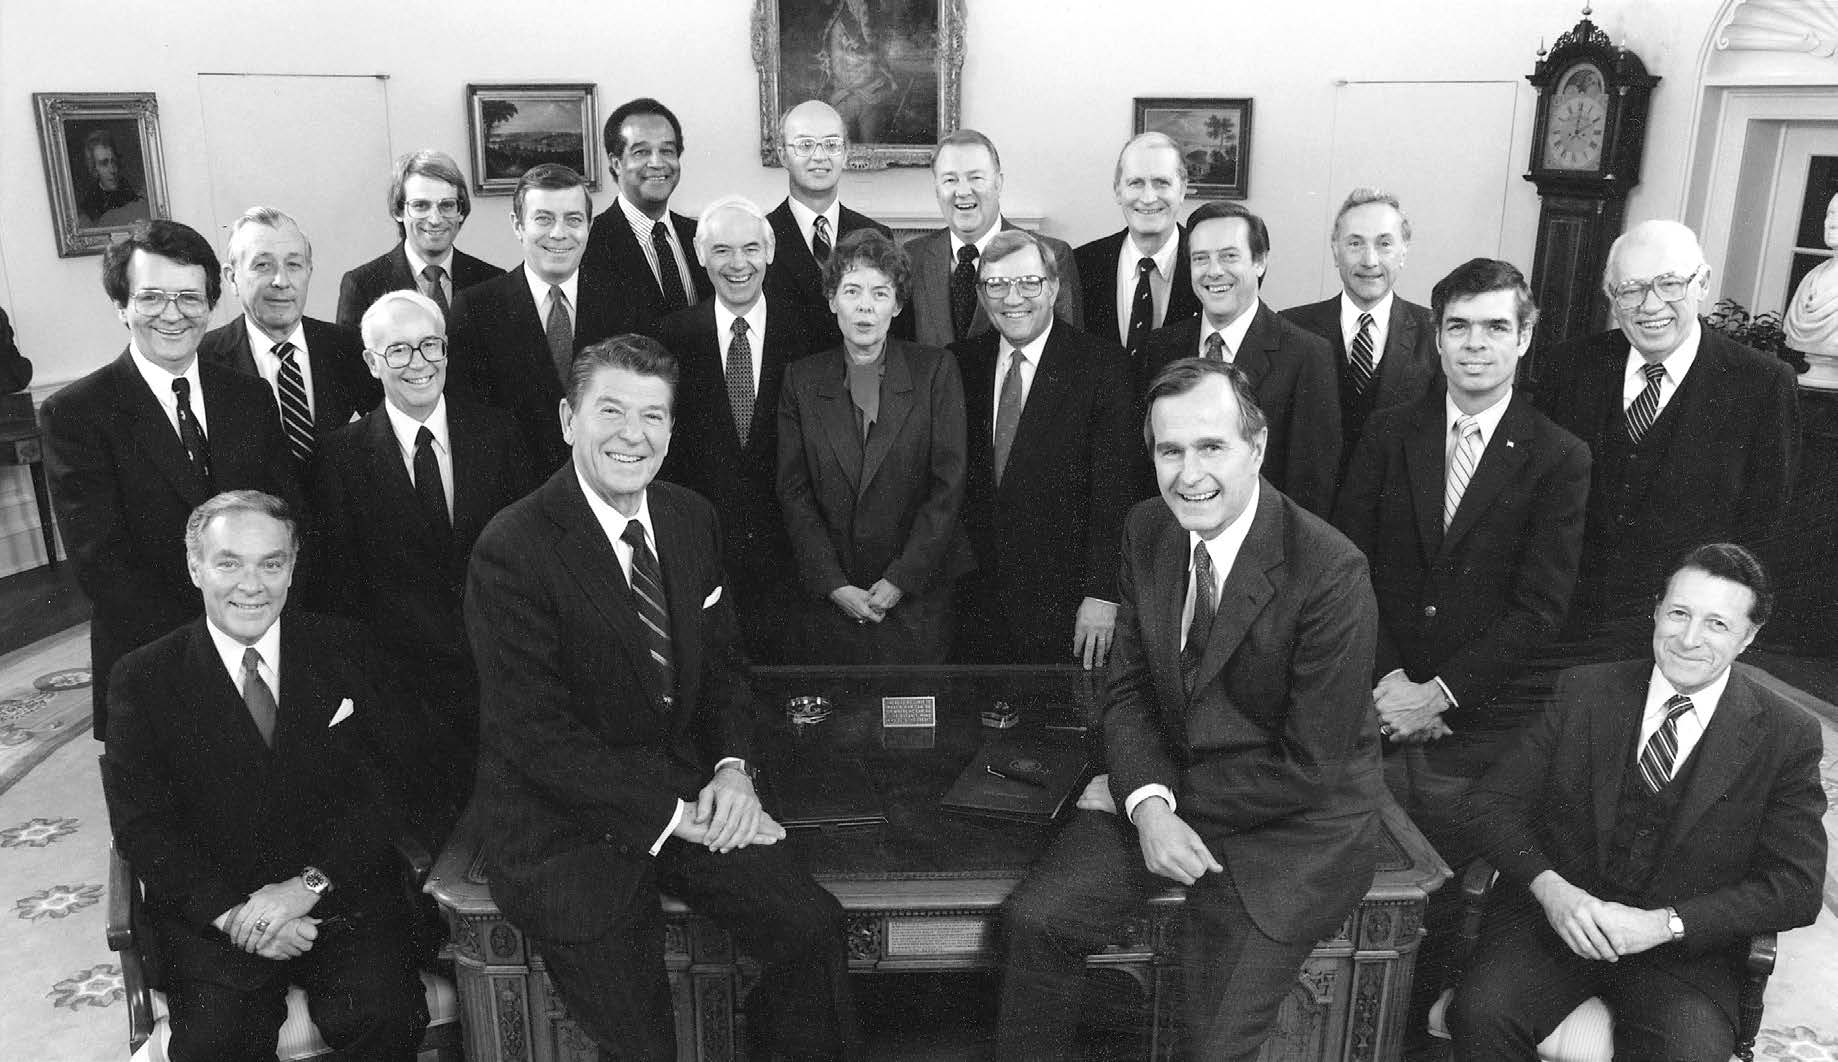 Reagan’s first official cabinet photo in the Oval Office, 1981. Ronald Reagan Presidential Library.